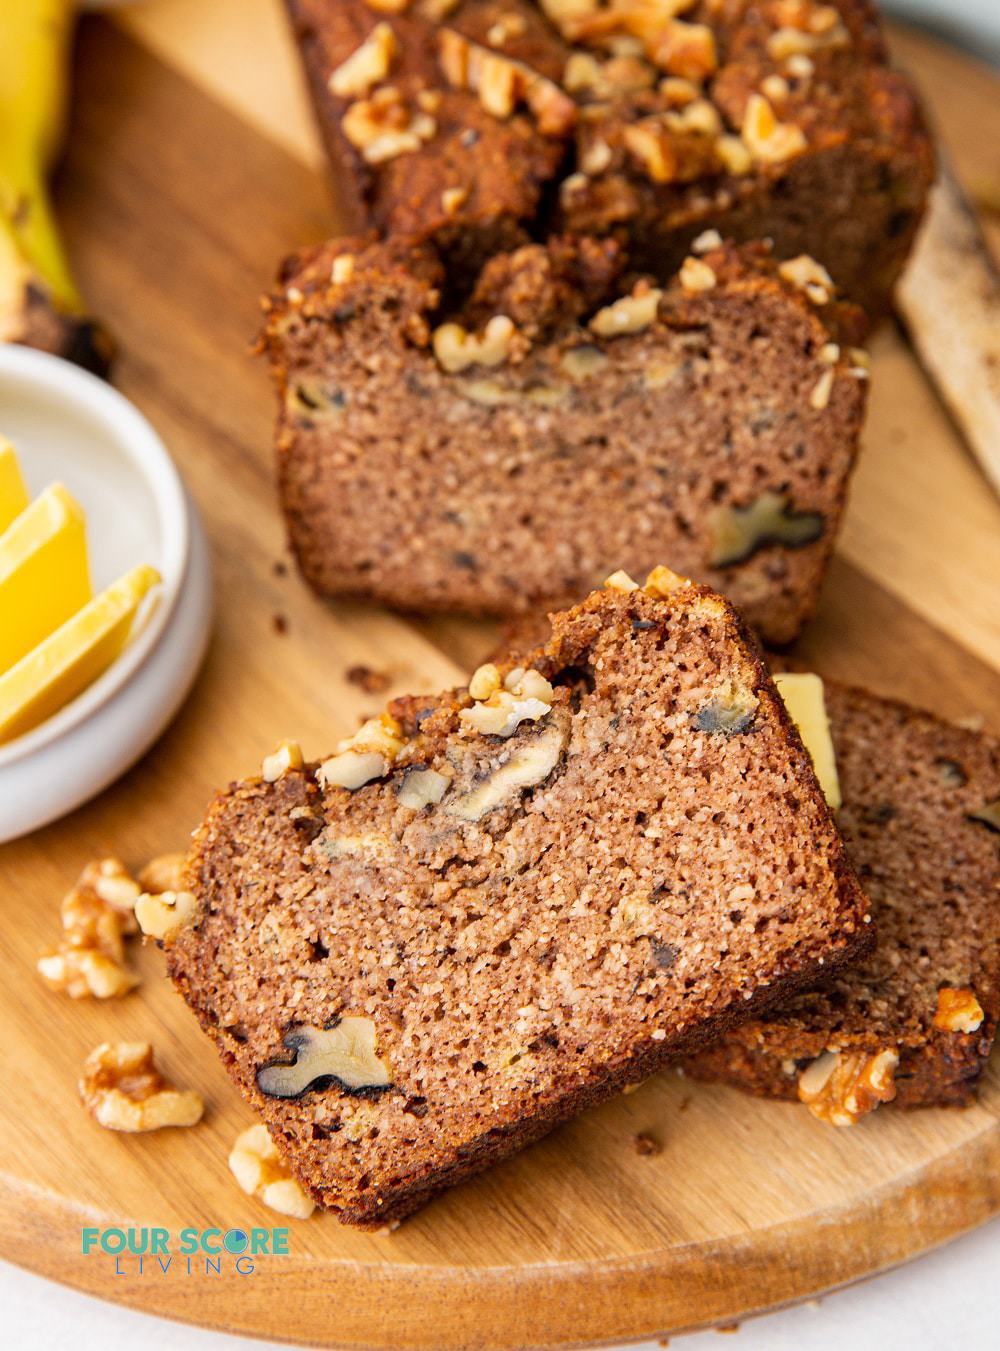 Slices of banana bread with walnuts on a wooden cutting board. a small bowl of butter pats is next to the bread.